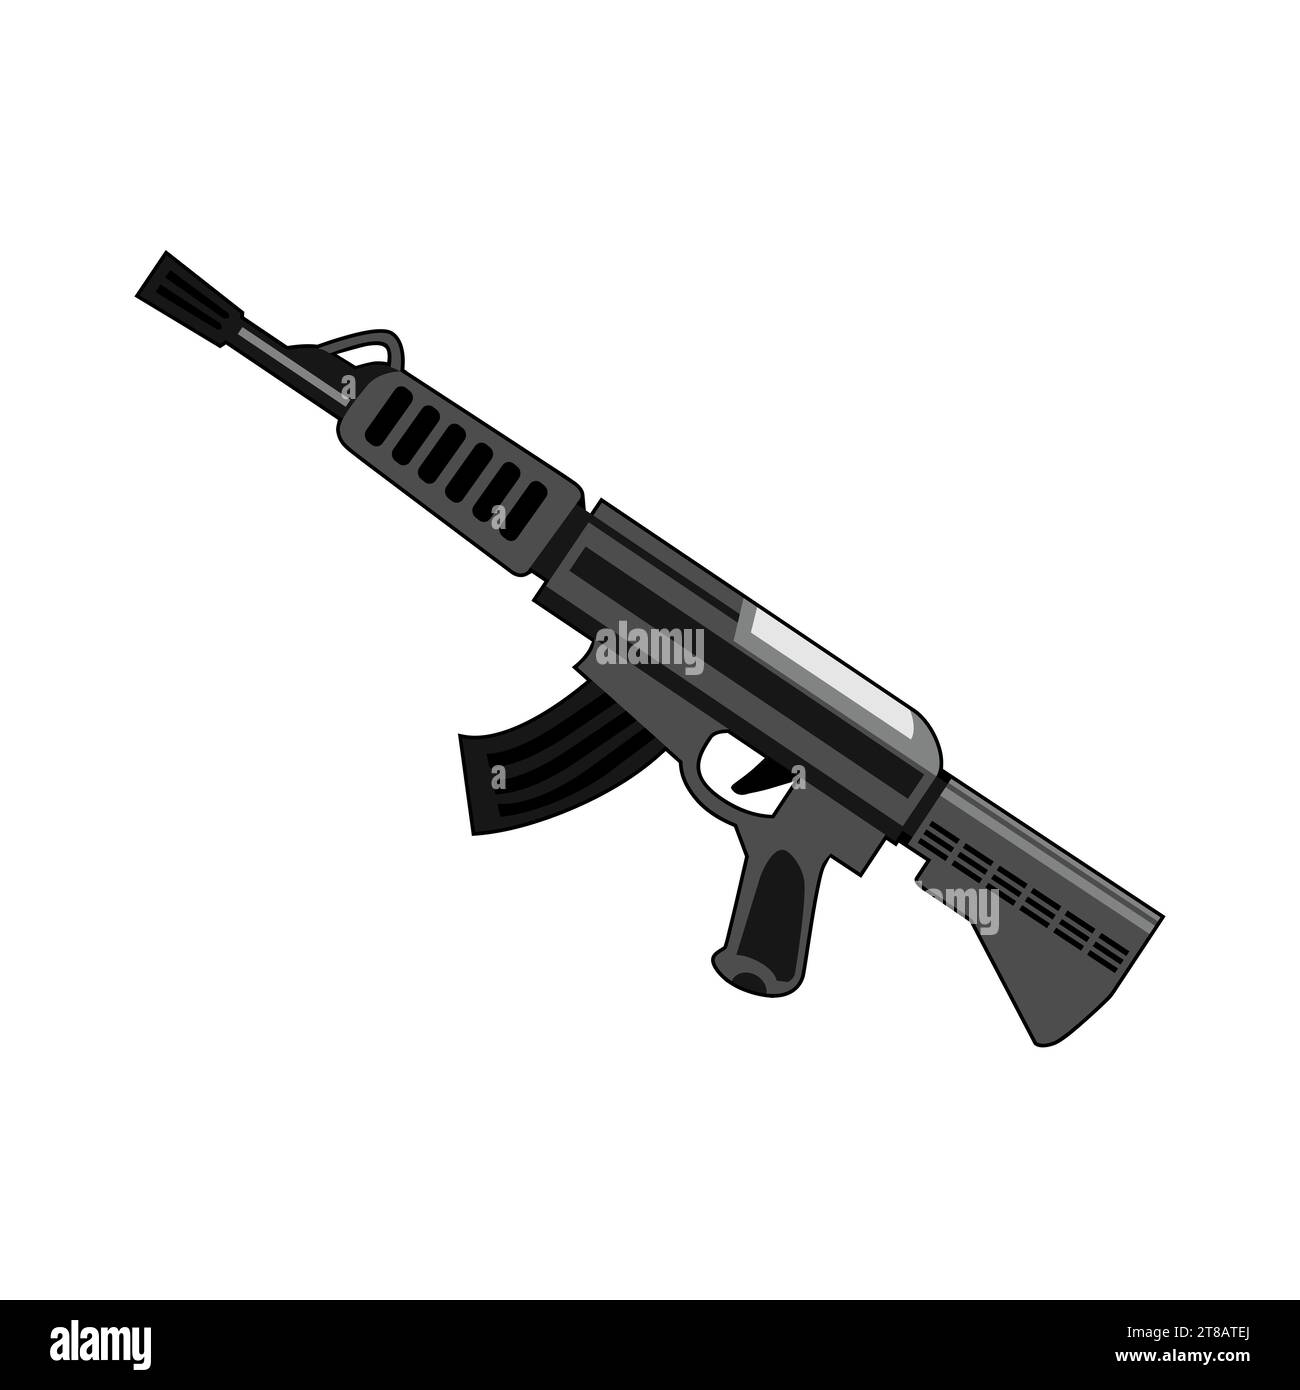 Rifle guns types, military and hunting weapon models, vector Stock Vector